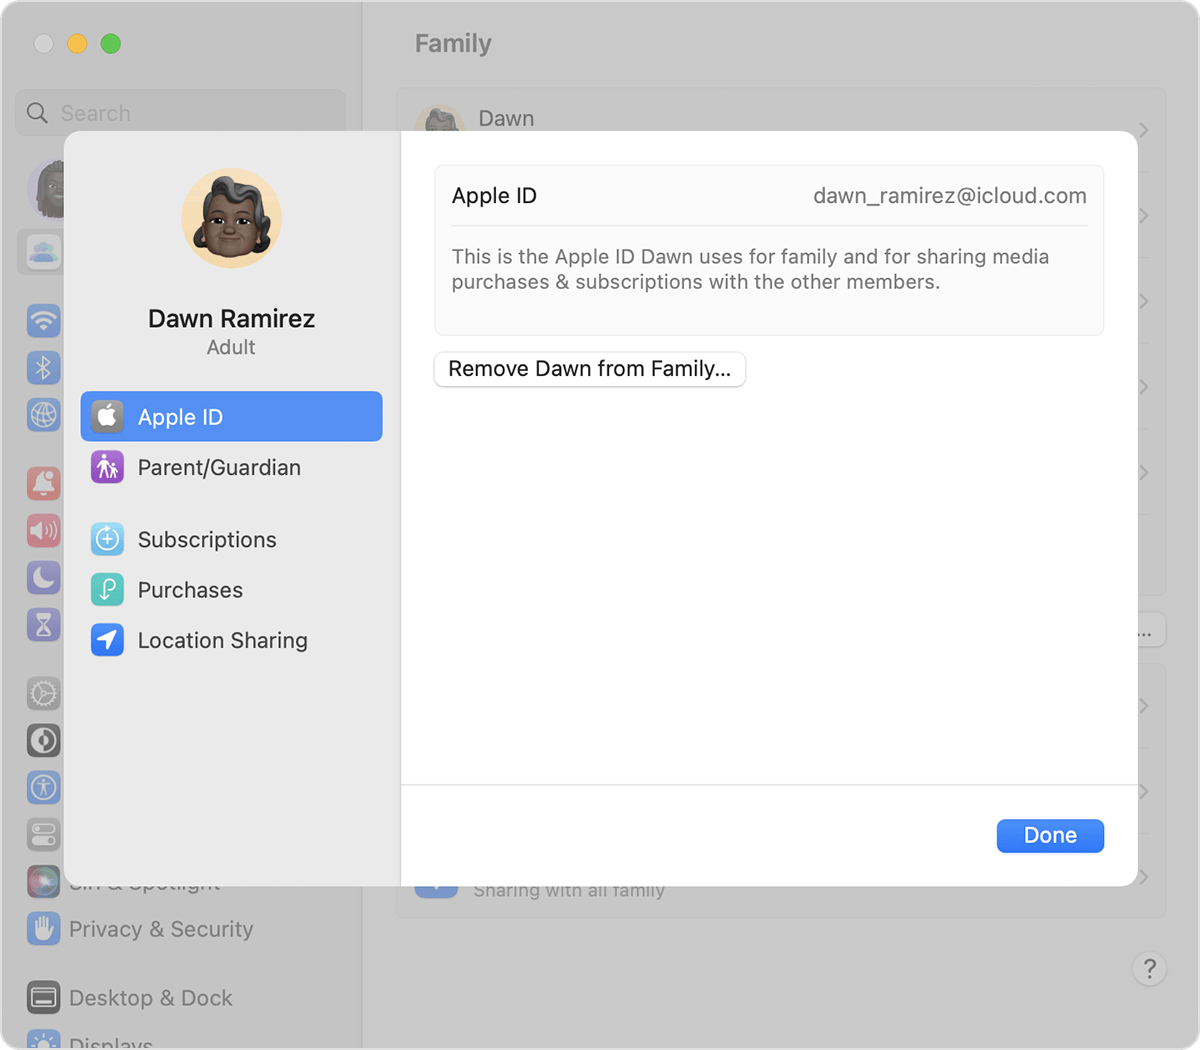 Remove [family member's name] from Family is located below their Apple ID.